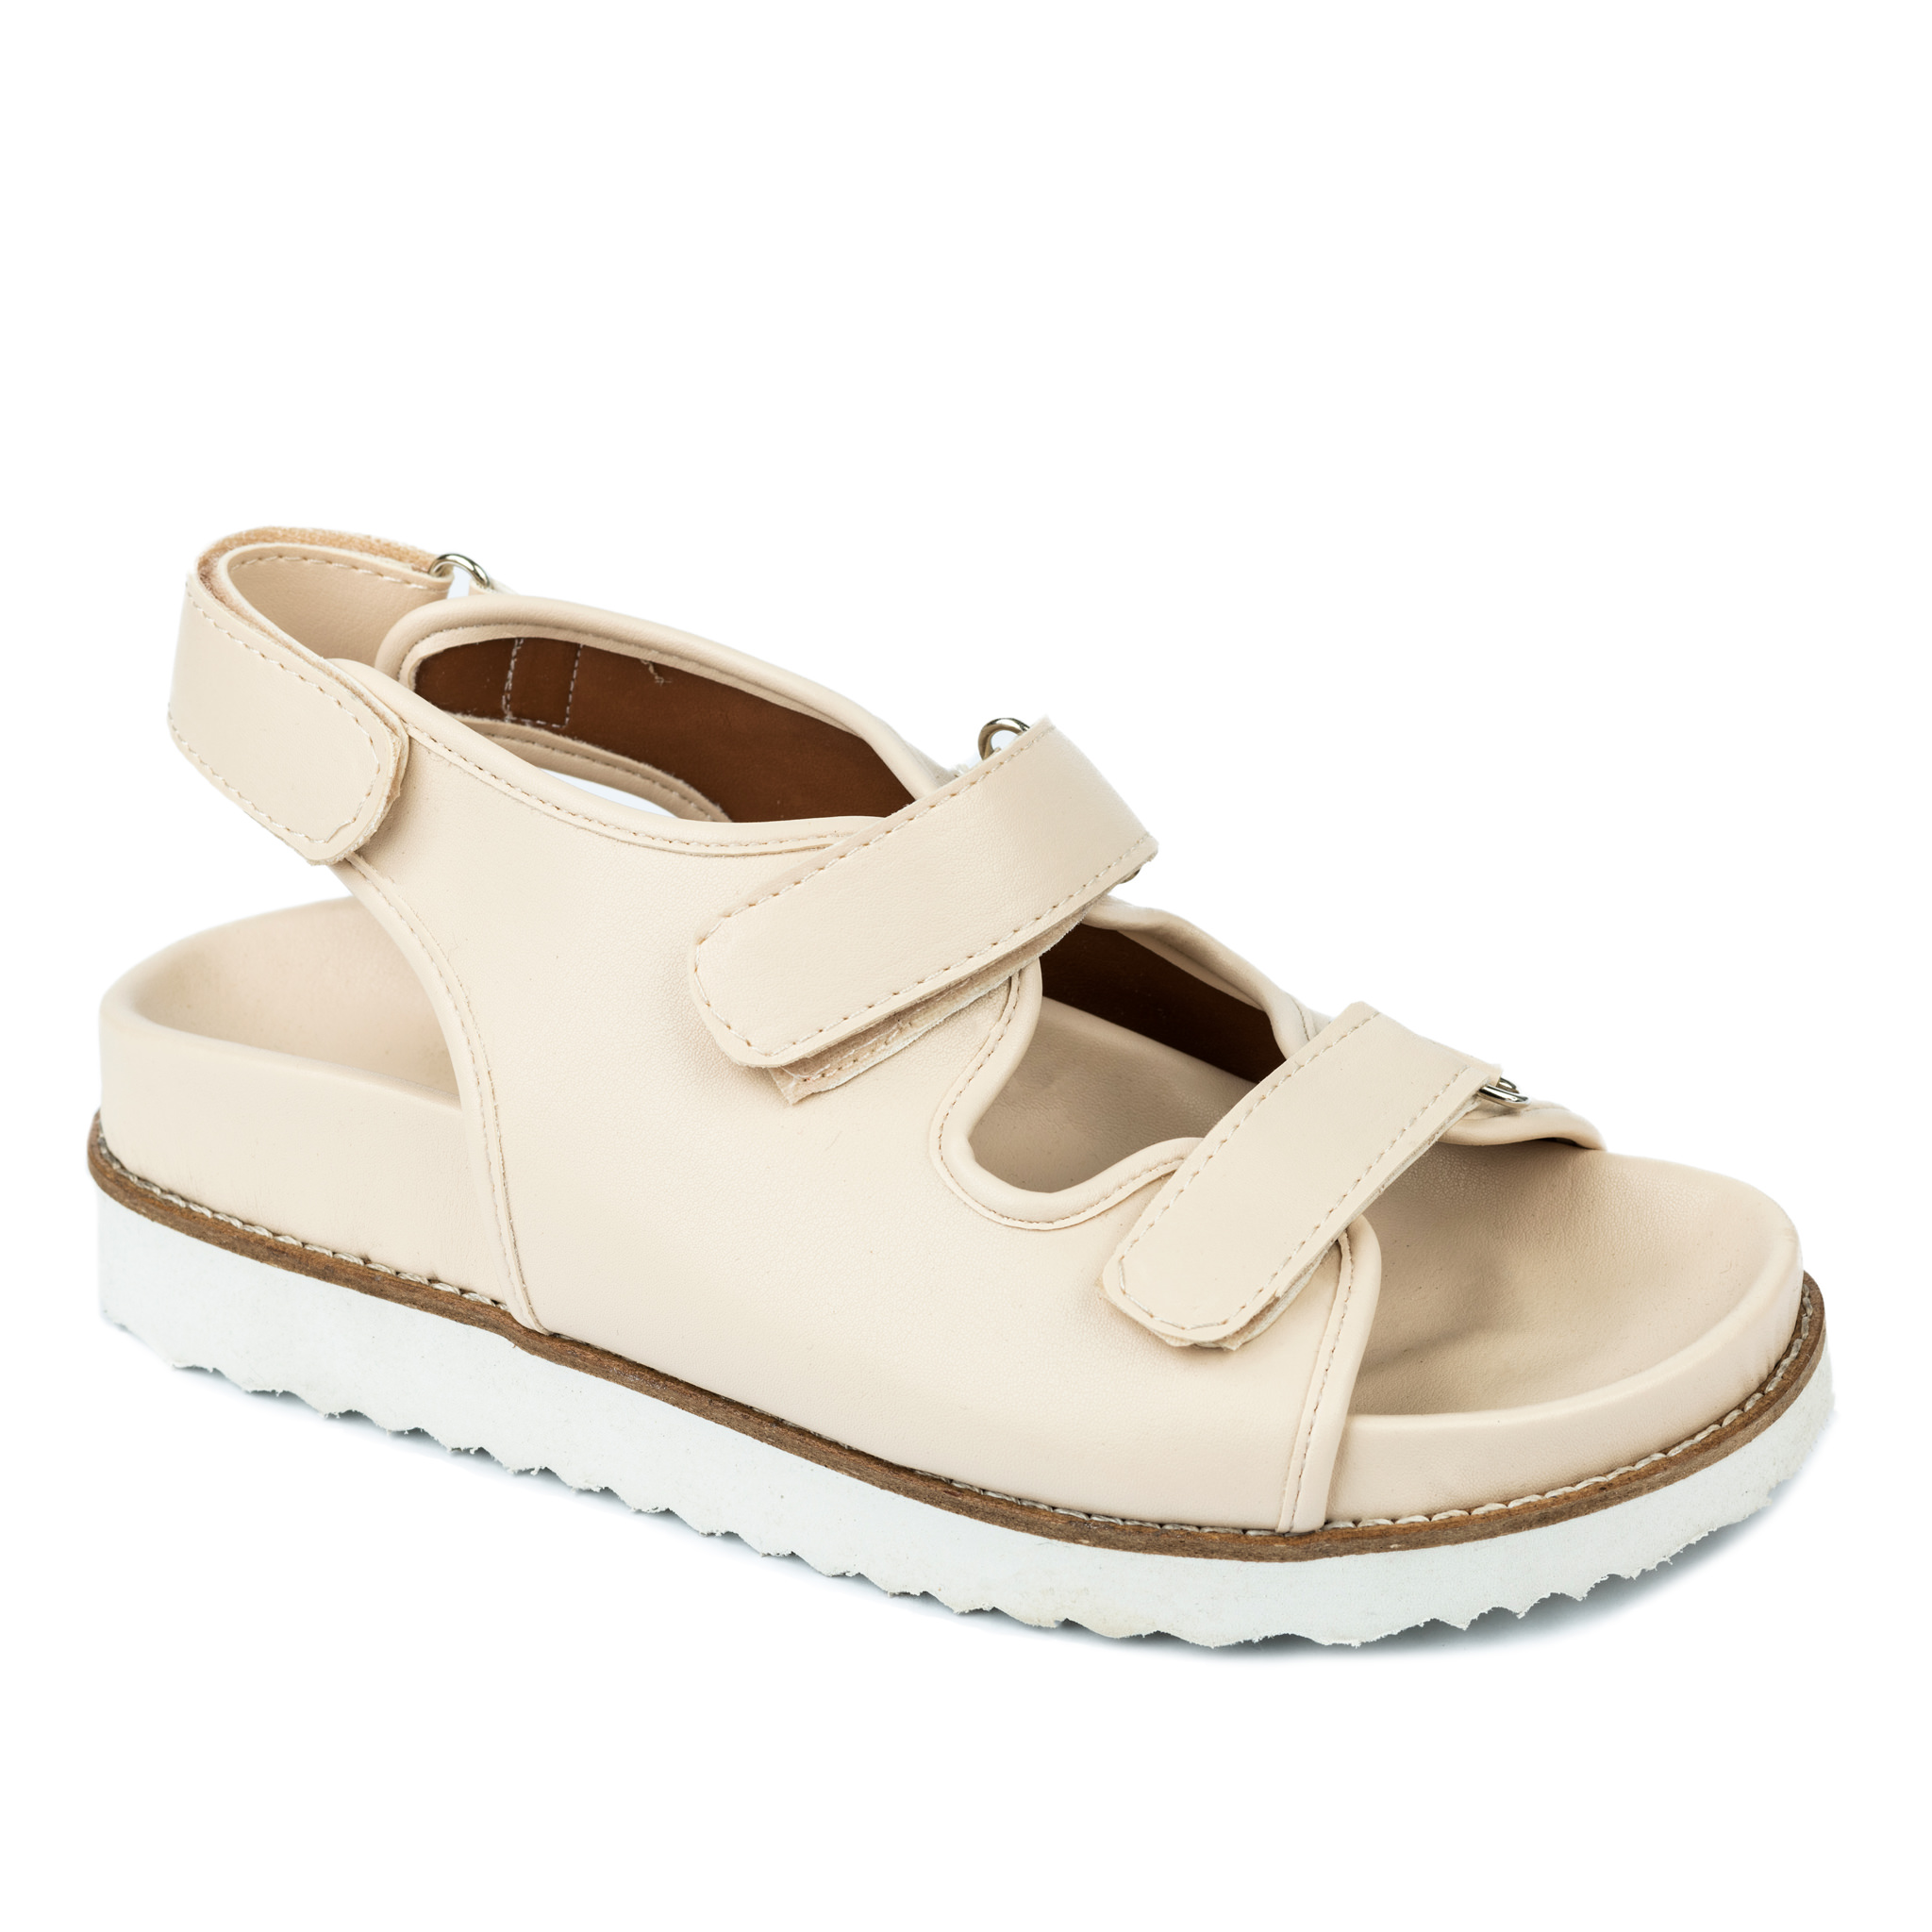 SPORT FLAT SANDALS WITH VELCRO BAND - BEIGE